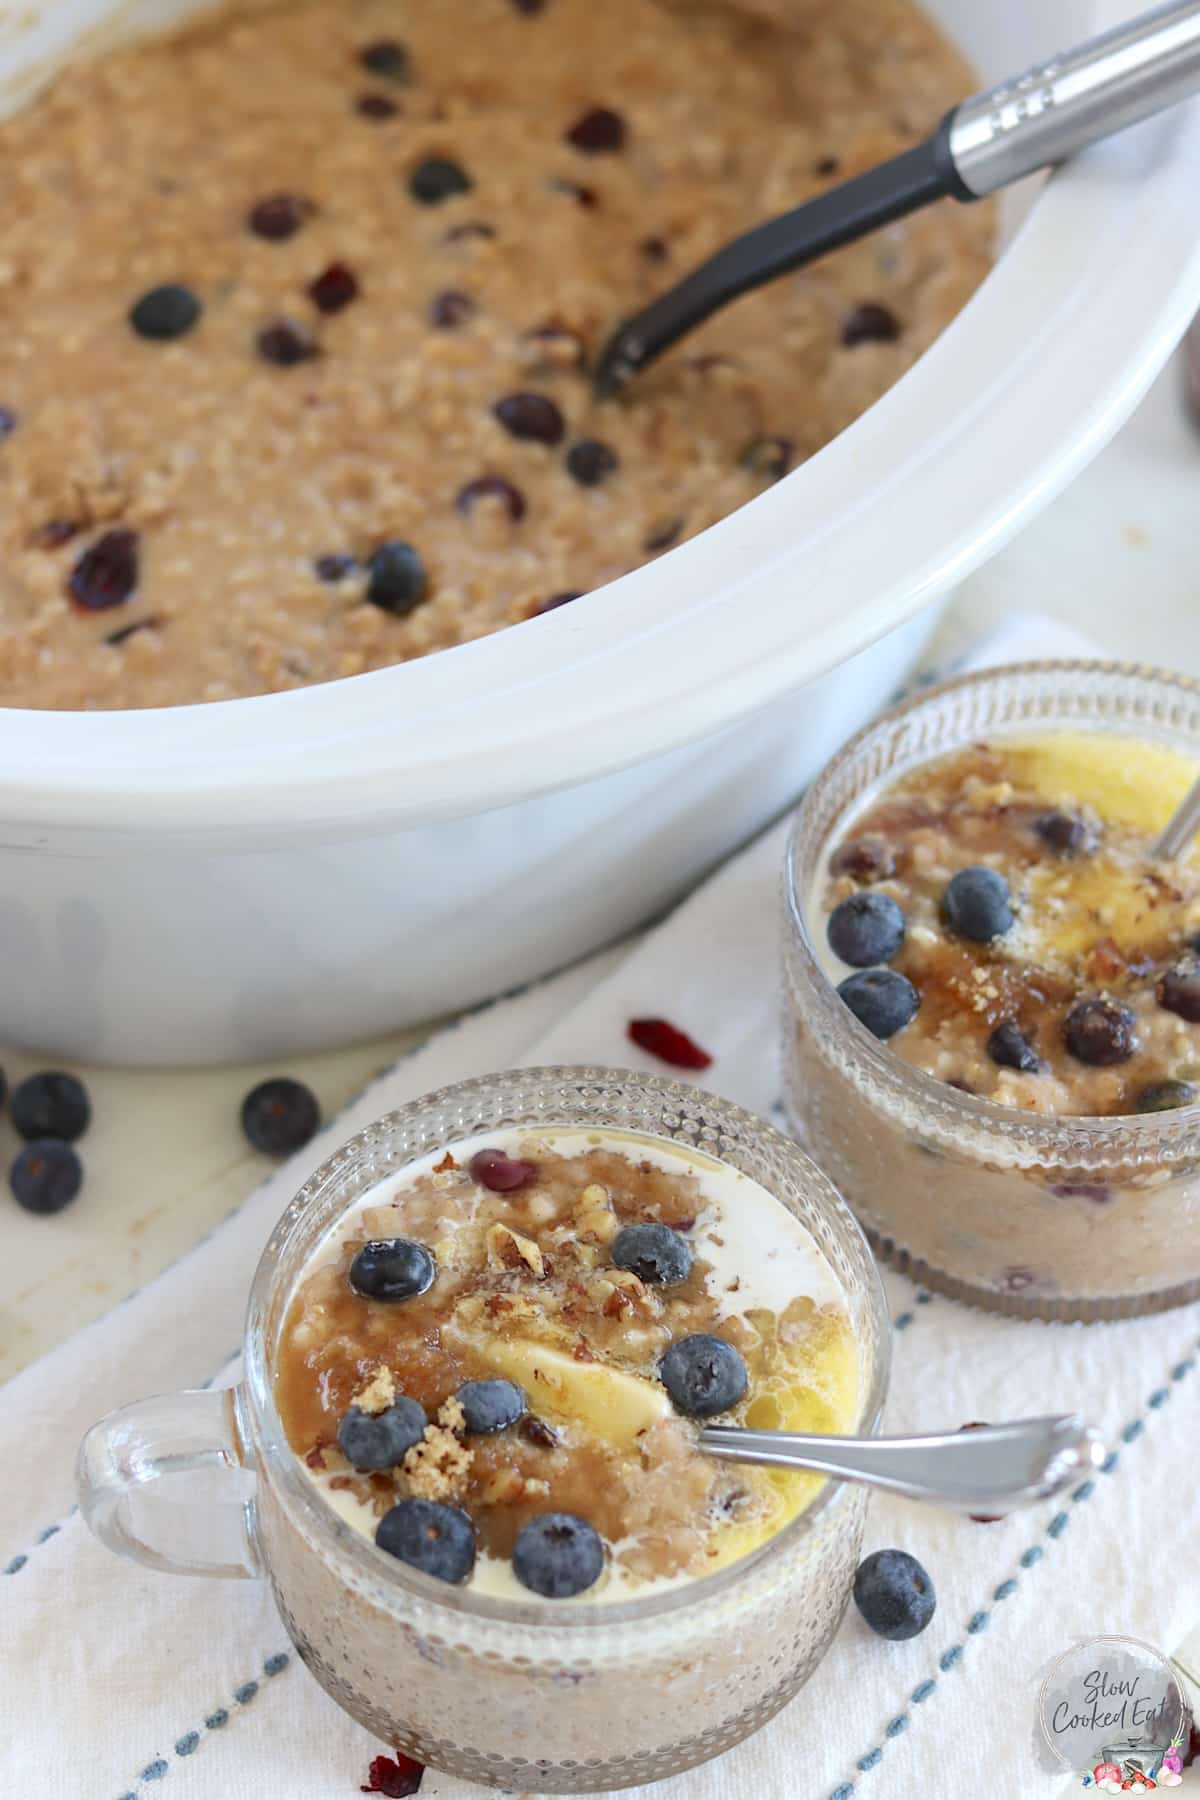 Two clear bowls with handles served with slow cooker steel cut oats with blueberries.